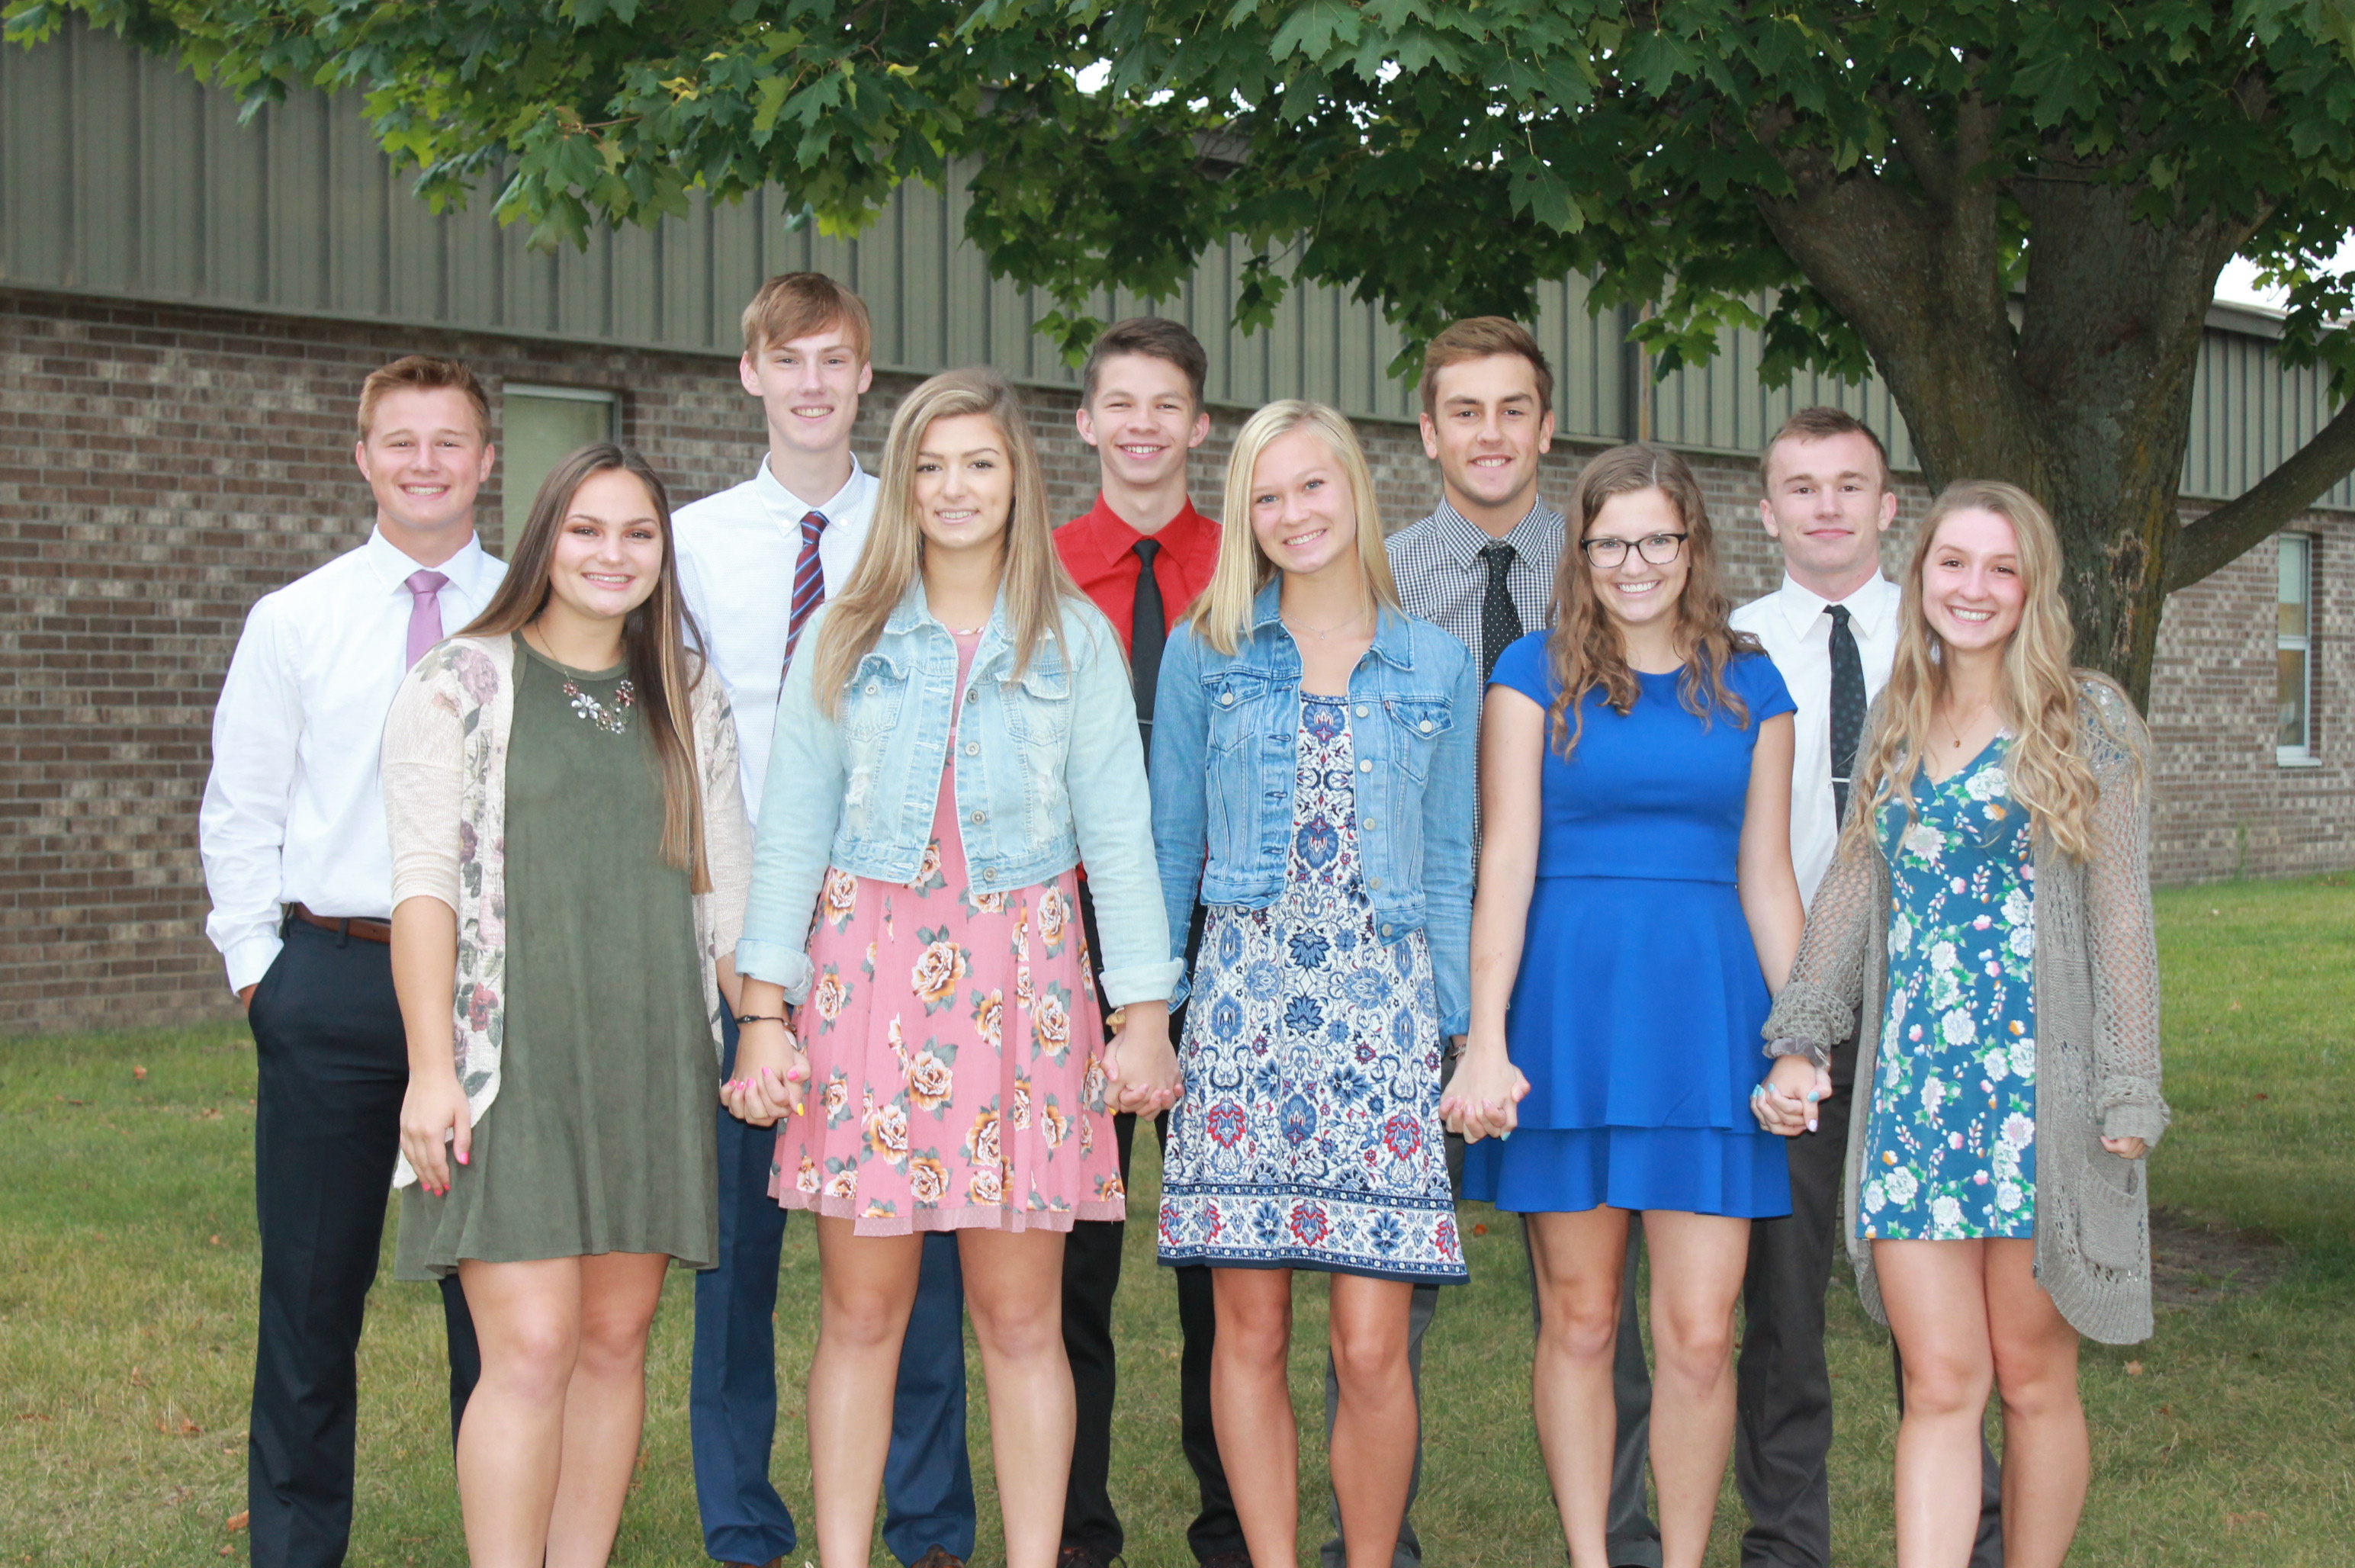 members of the homecoming court